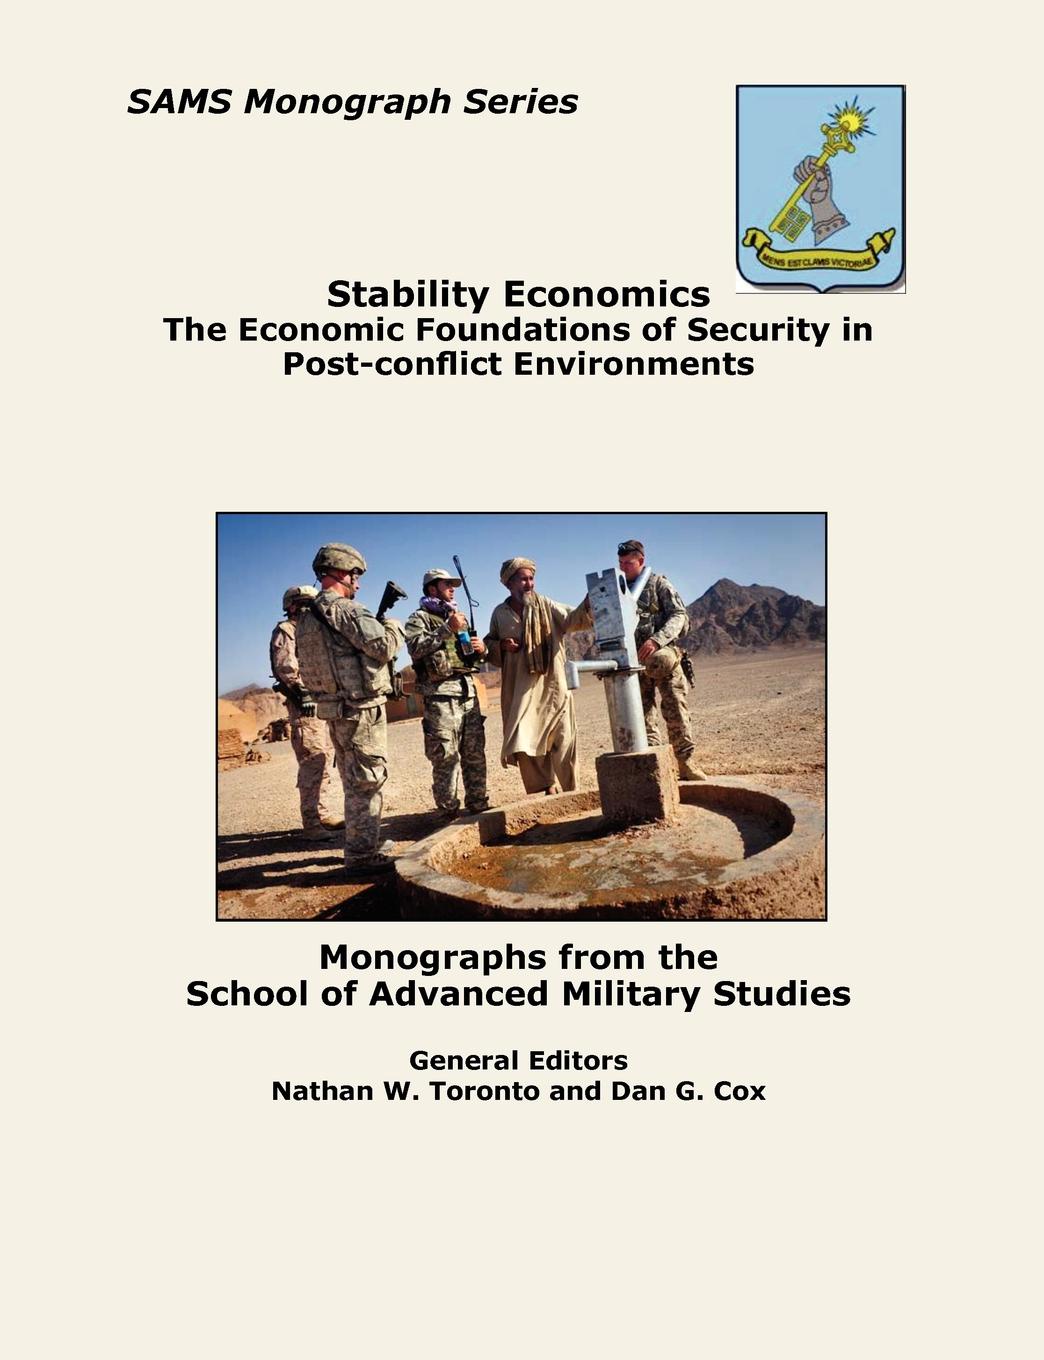 Stability Economics. The Economic Foundations of Security in Post-conflict Environments (SAMS Monograph Series)